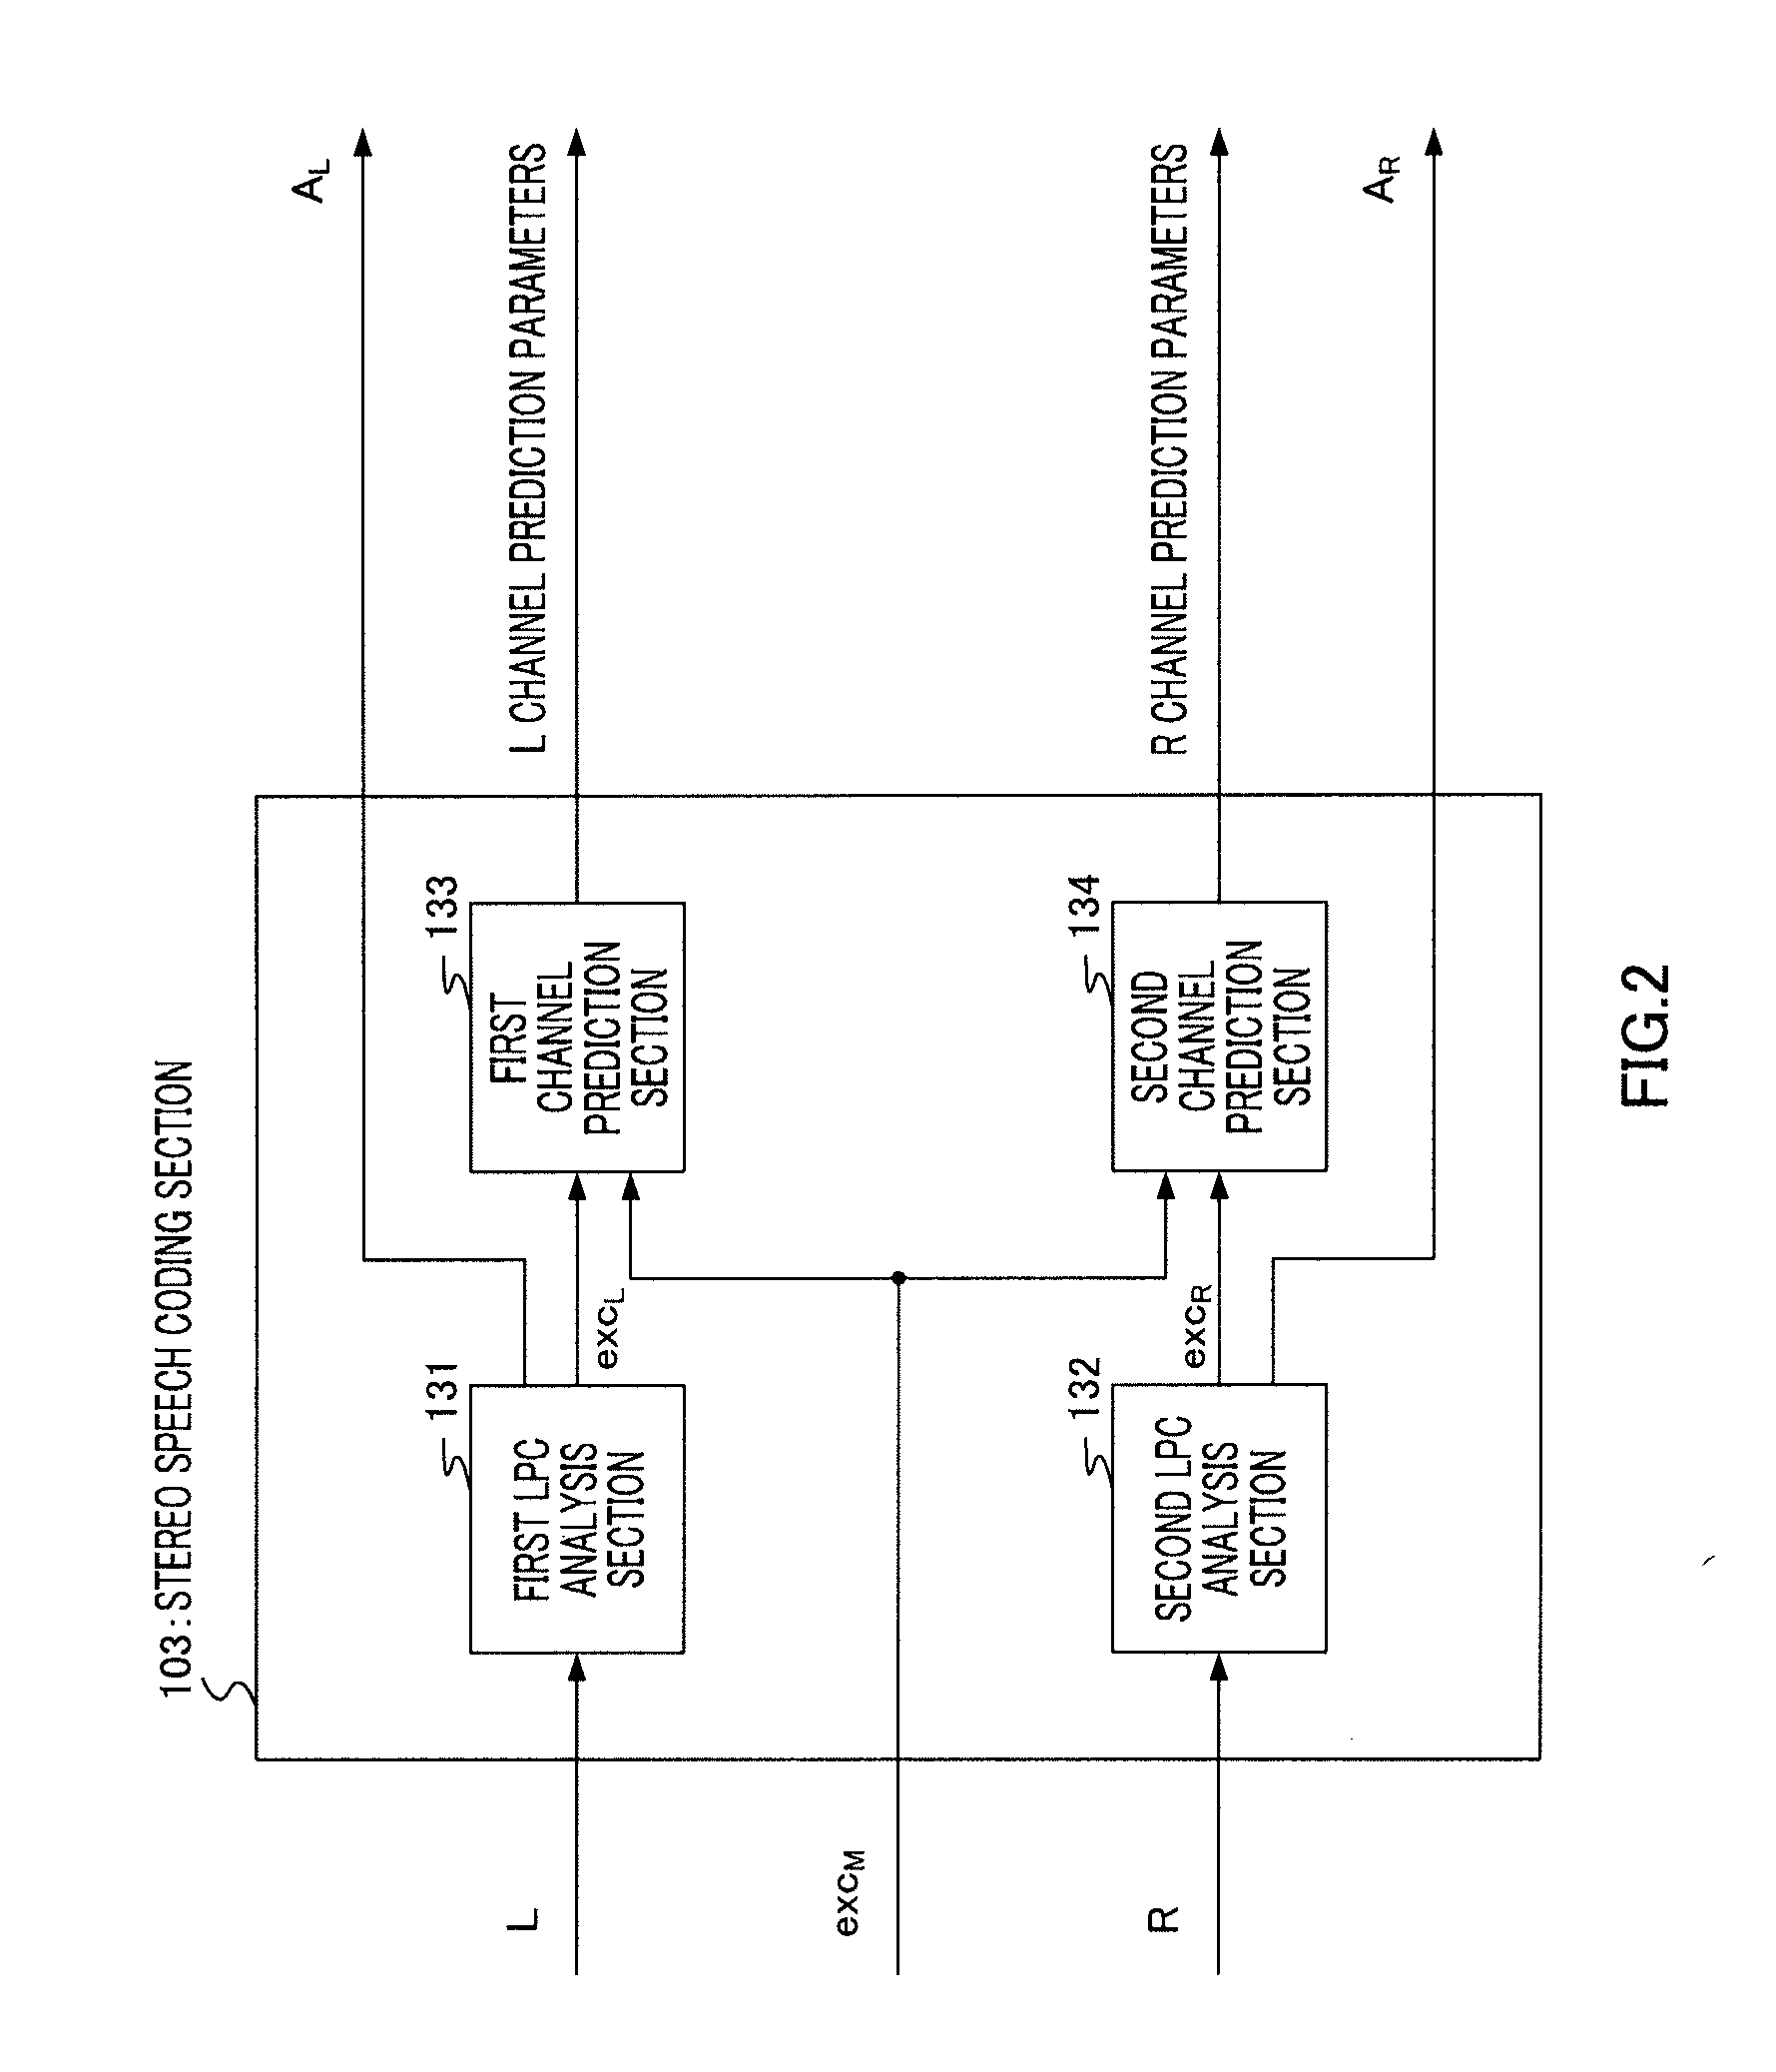 Stereo audio encoding device, stereo audio decoding device, and method thereof